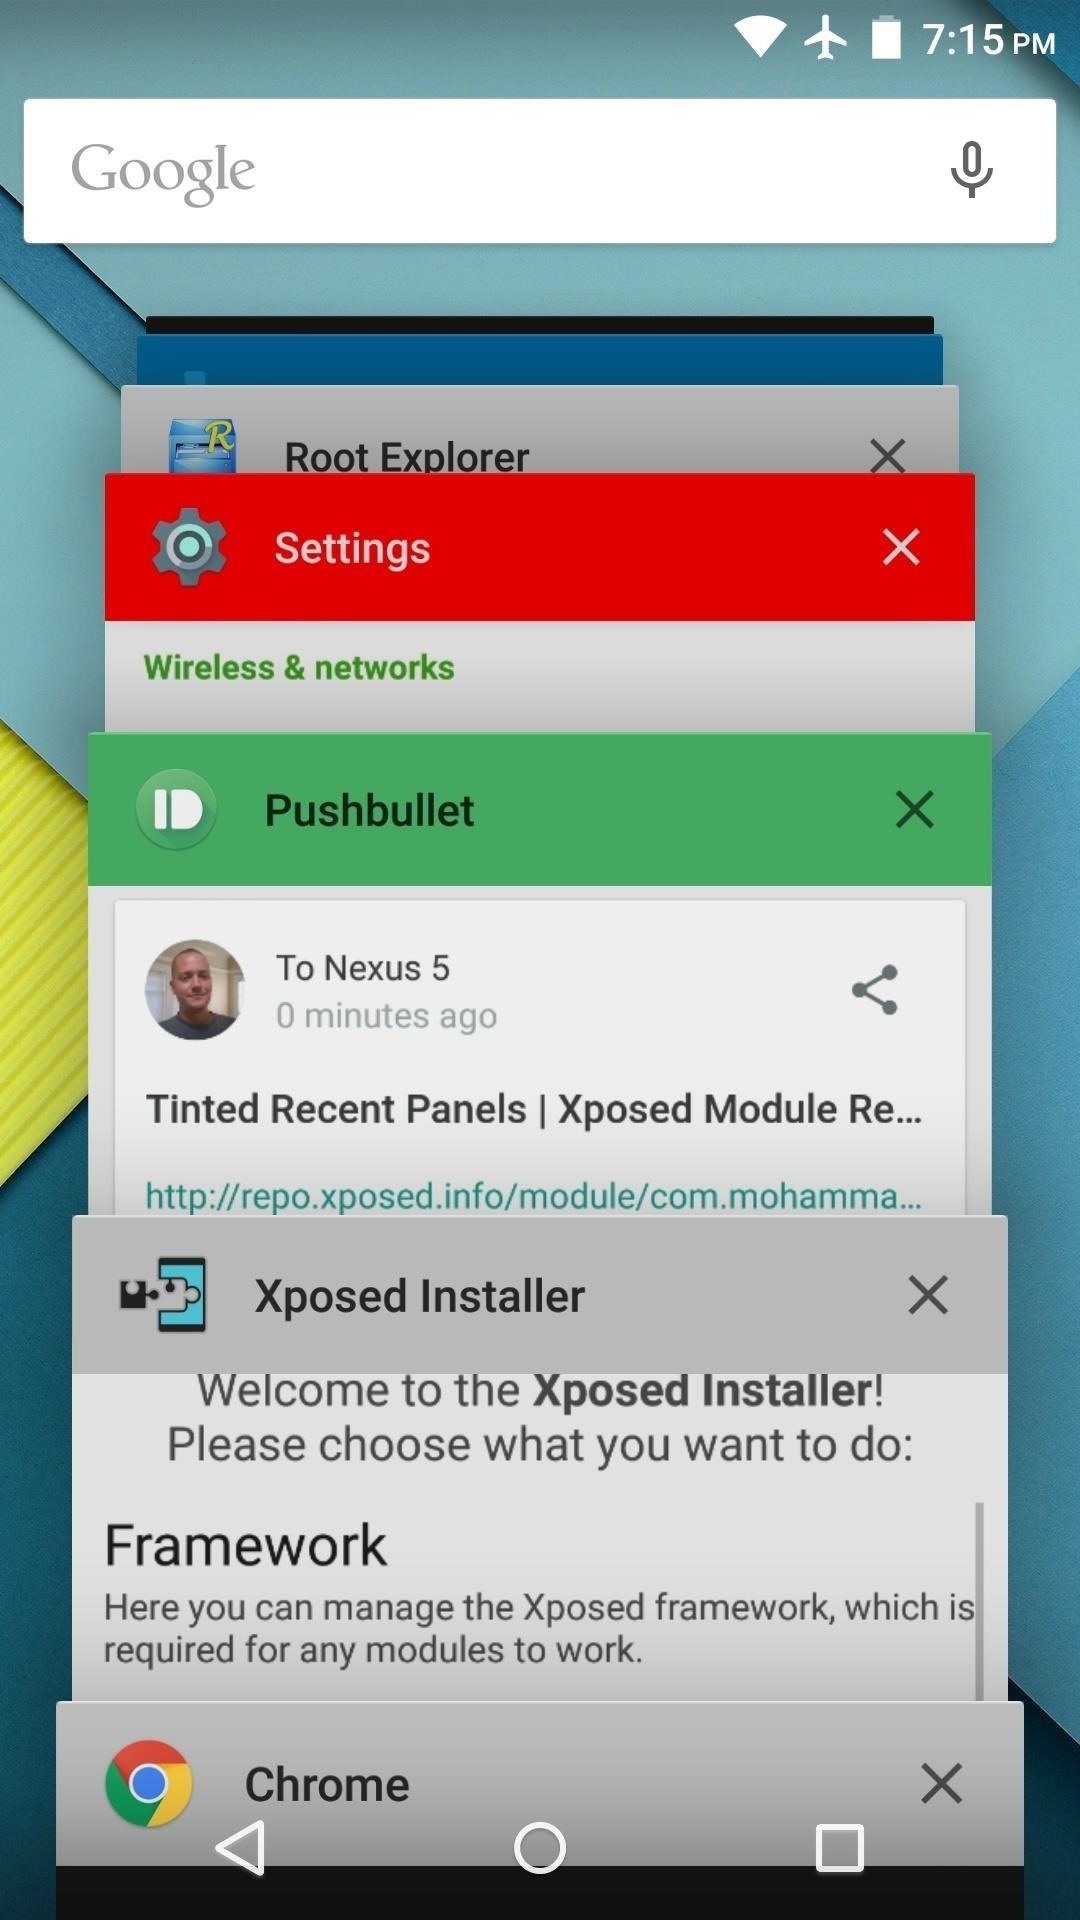 How to Trim Down Android Lollipop's Overview Screen